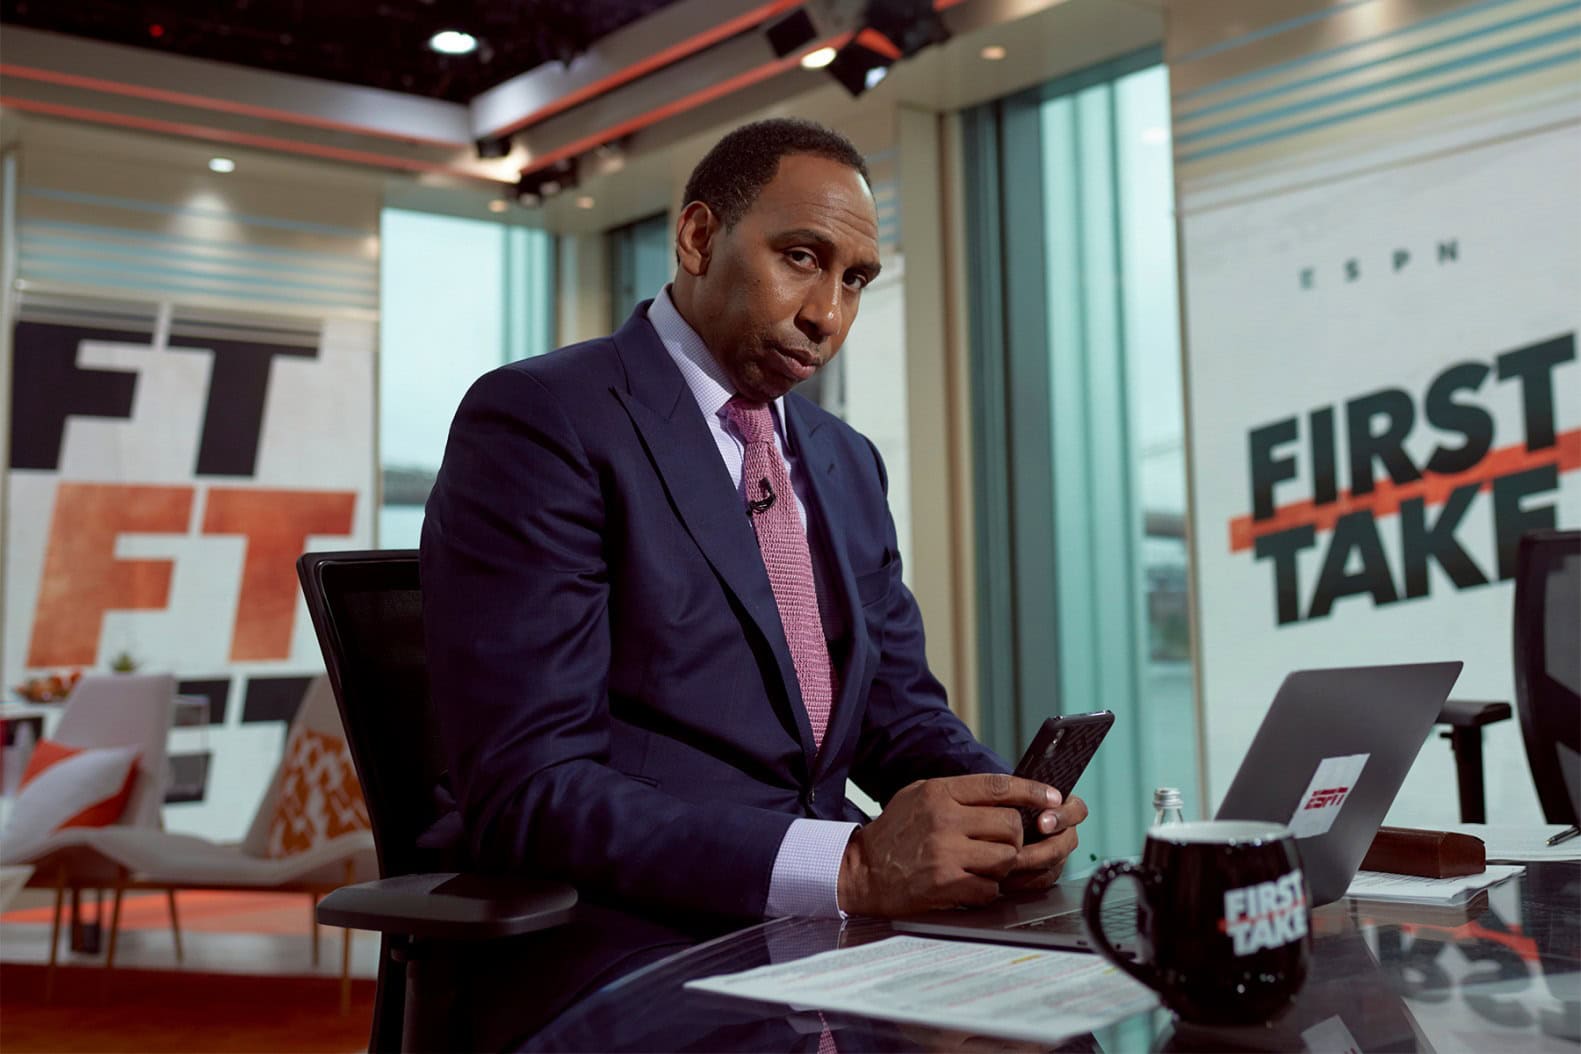 Stephen A. Smith Pushes for $20 Million Annual Extension with ESPN